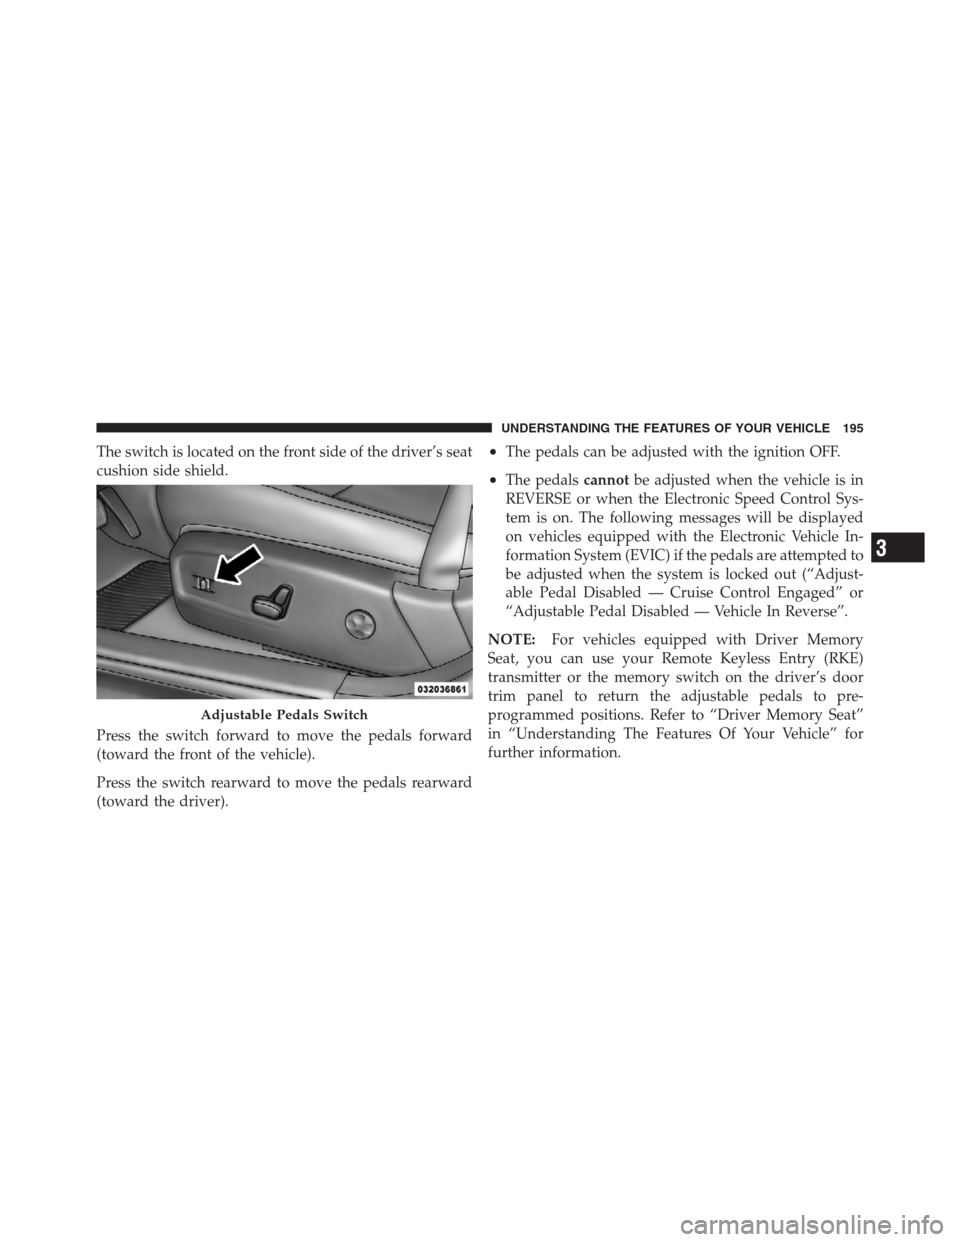 CHRYSLER 300 2012 2.G Owners Manual The switch is located on the front side of the driver’s seat
cushion side shield.
Press the switch forward to move the pedals forward
(toward the front of the vehicle).
Press the switch rearward to 